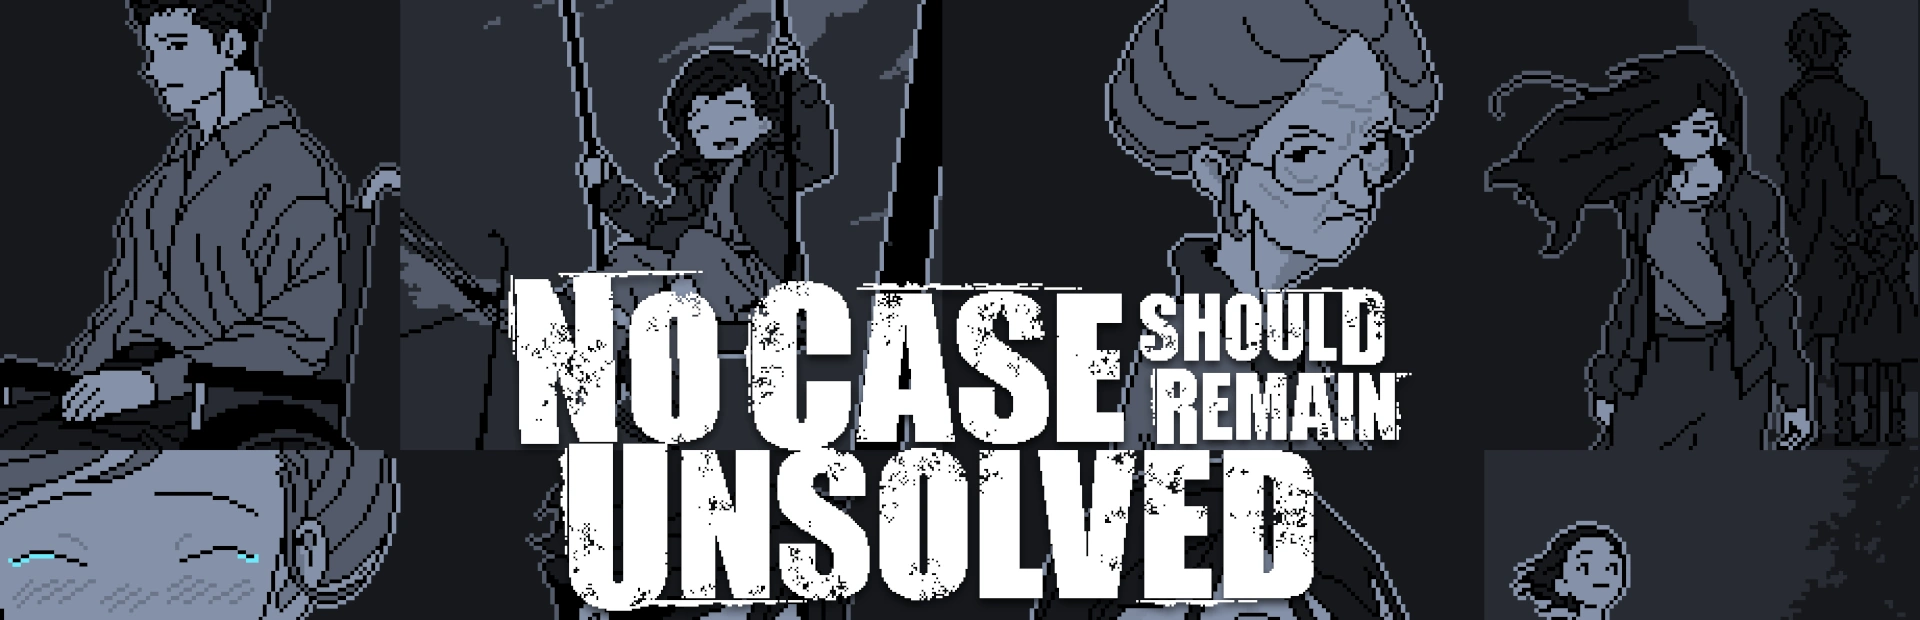 No.Case .Should.Remain.Unsolved.banner3